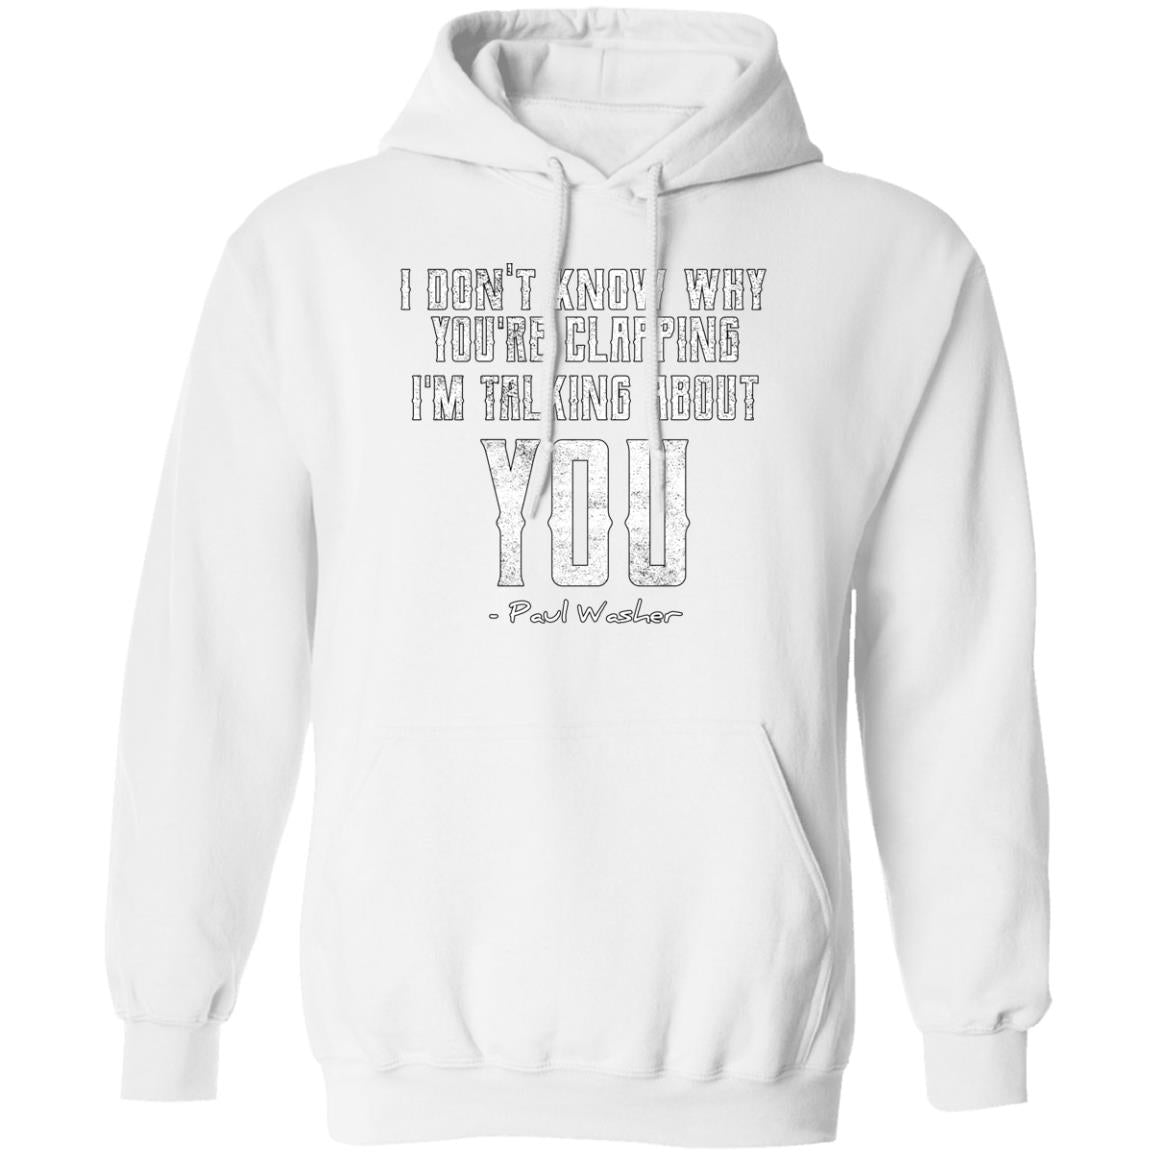 I Don't Know Why You're Clapping (Unisex Hoodie)